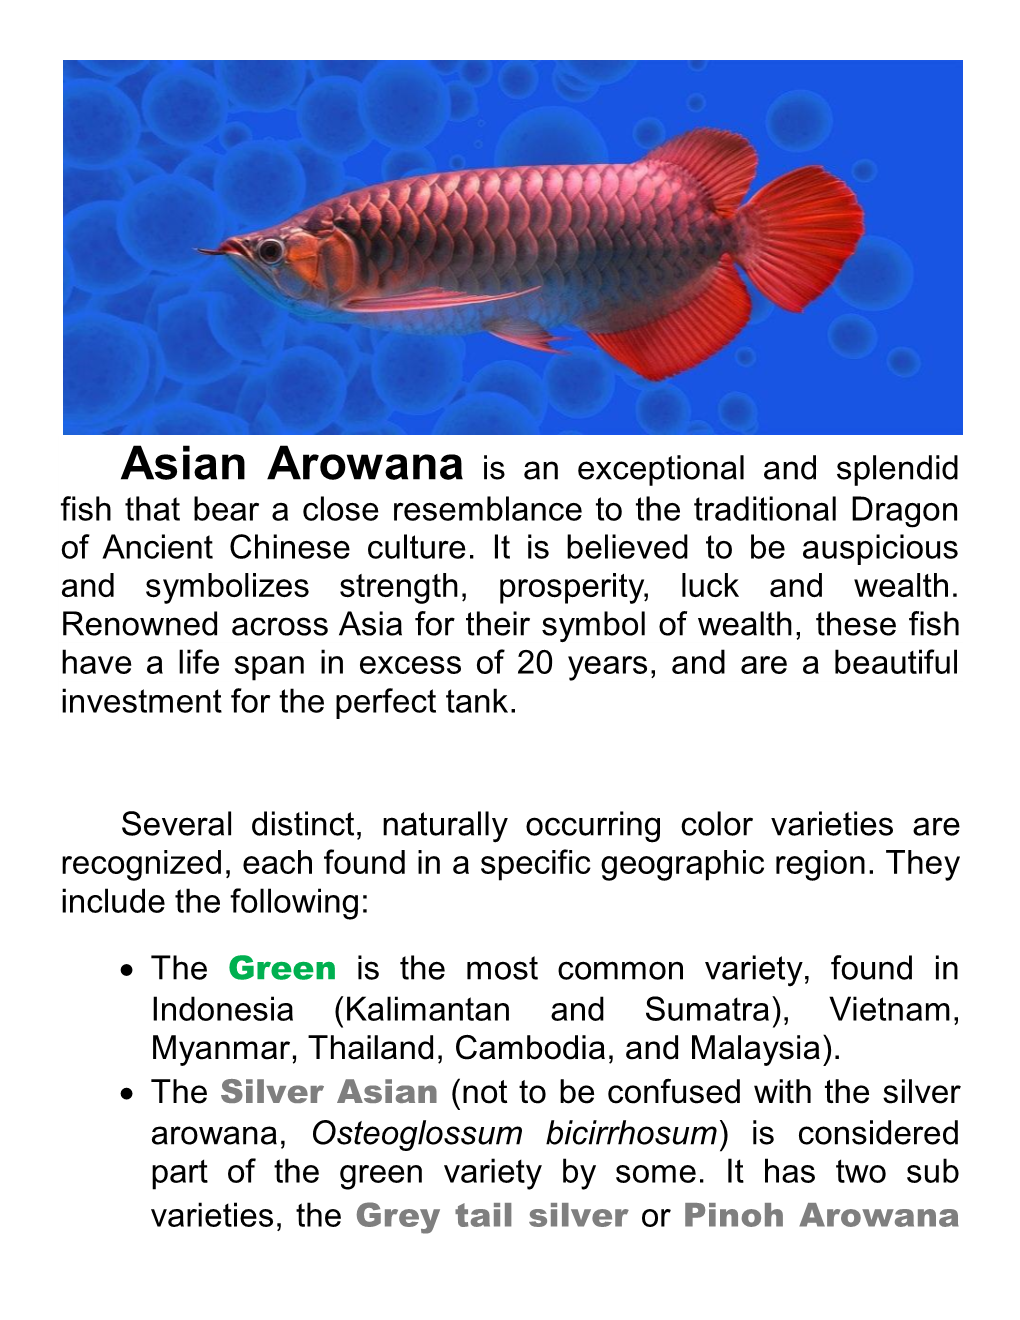 Asian Arowana Is an Exceptional and Splendid Fish That Bear a Close Resemblance to the Traditional Dragon of Ancient Chinese Culture